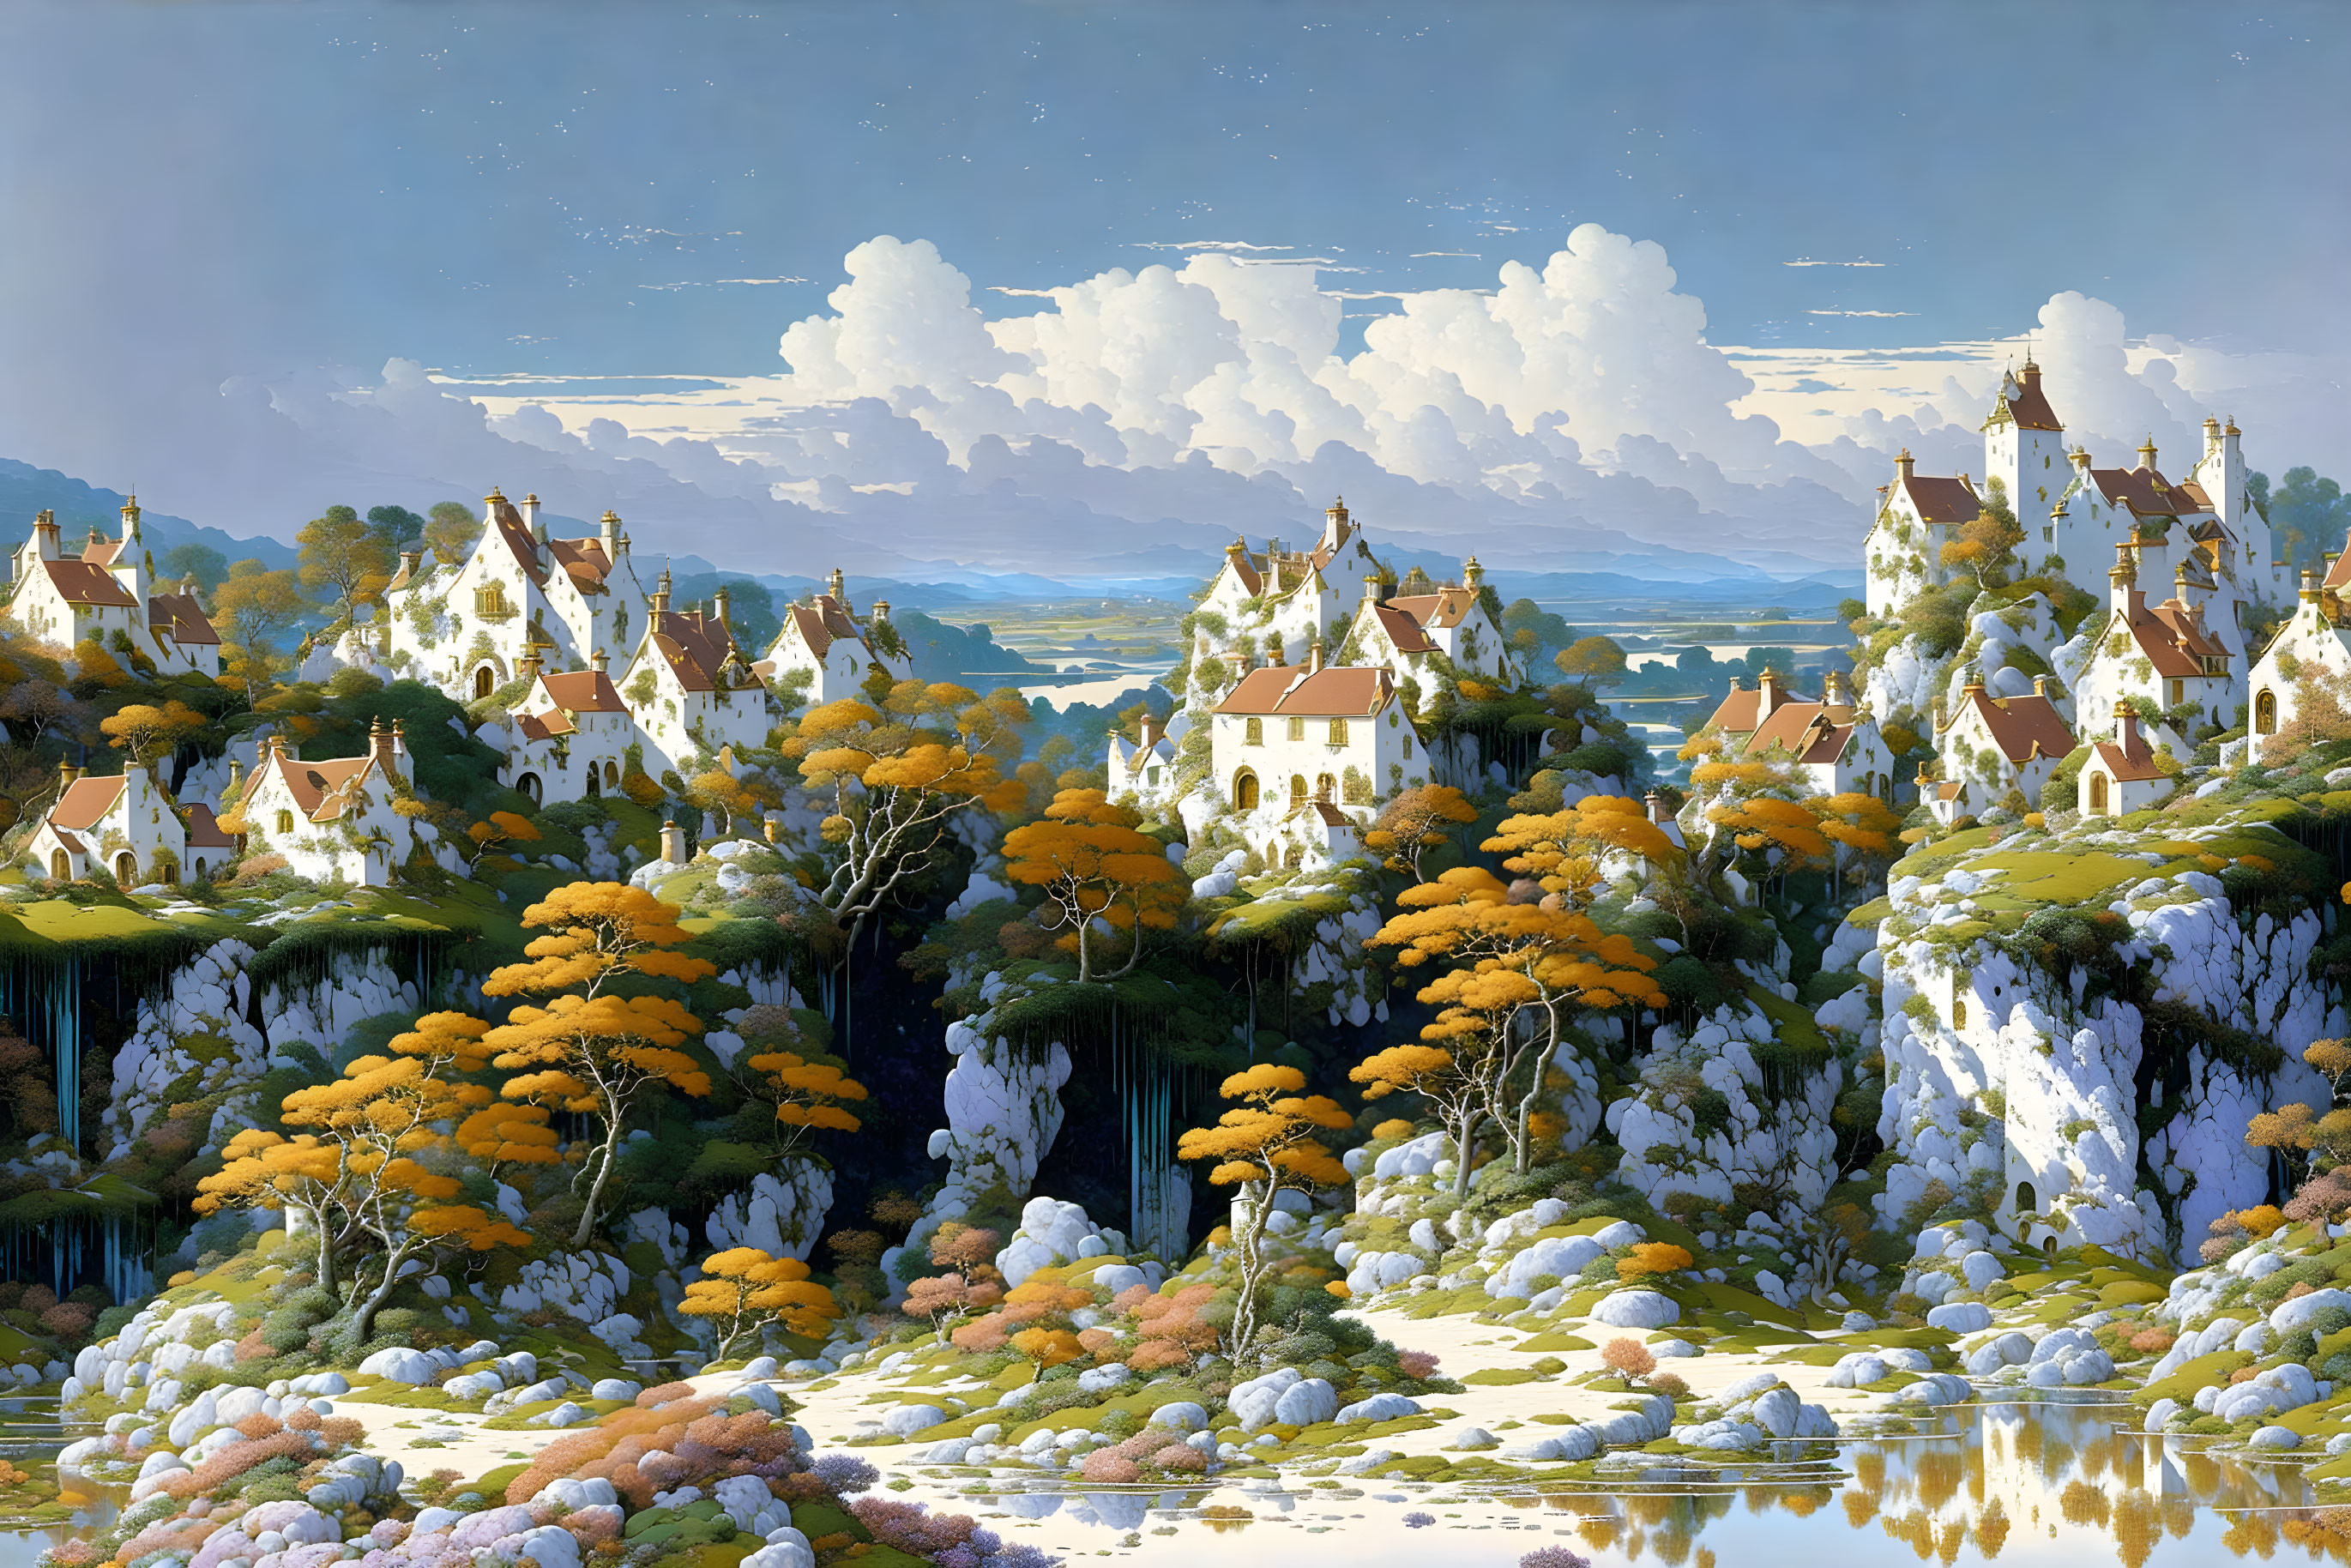 Tranquil fantasy landscape with white-roofed houses, lush trees, rocky outcrops,